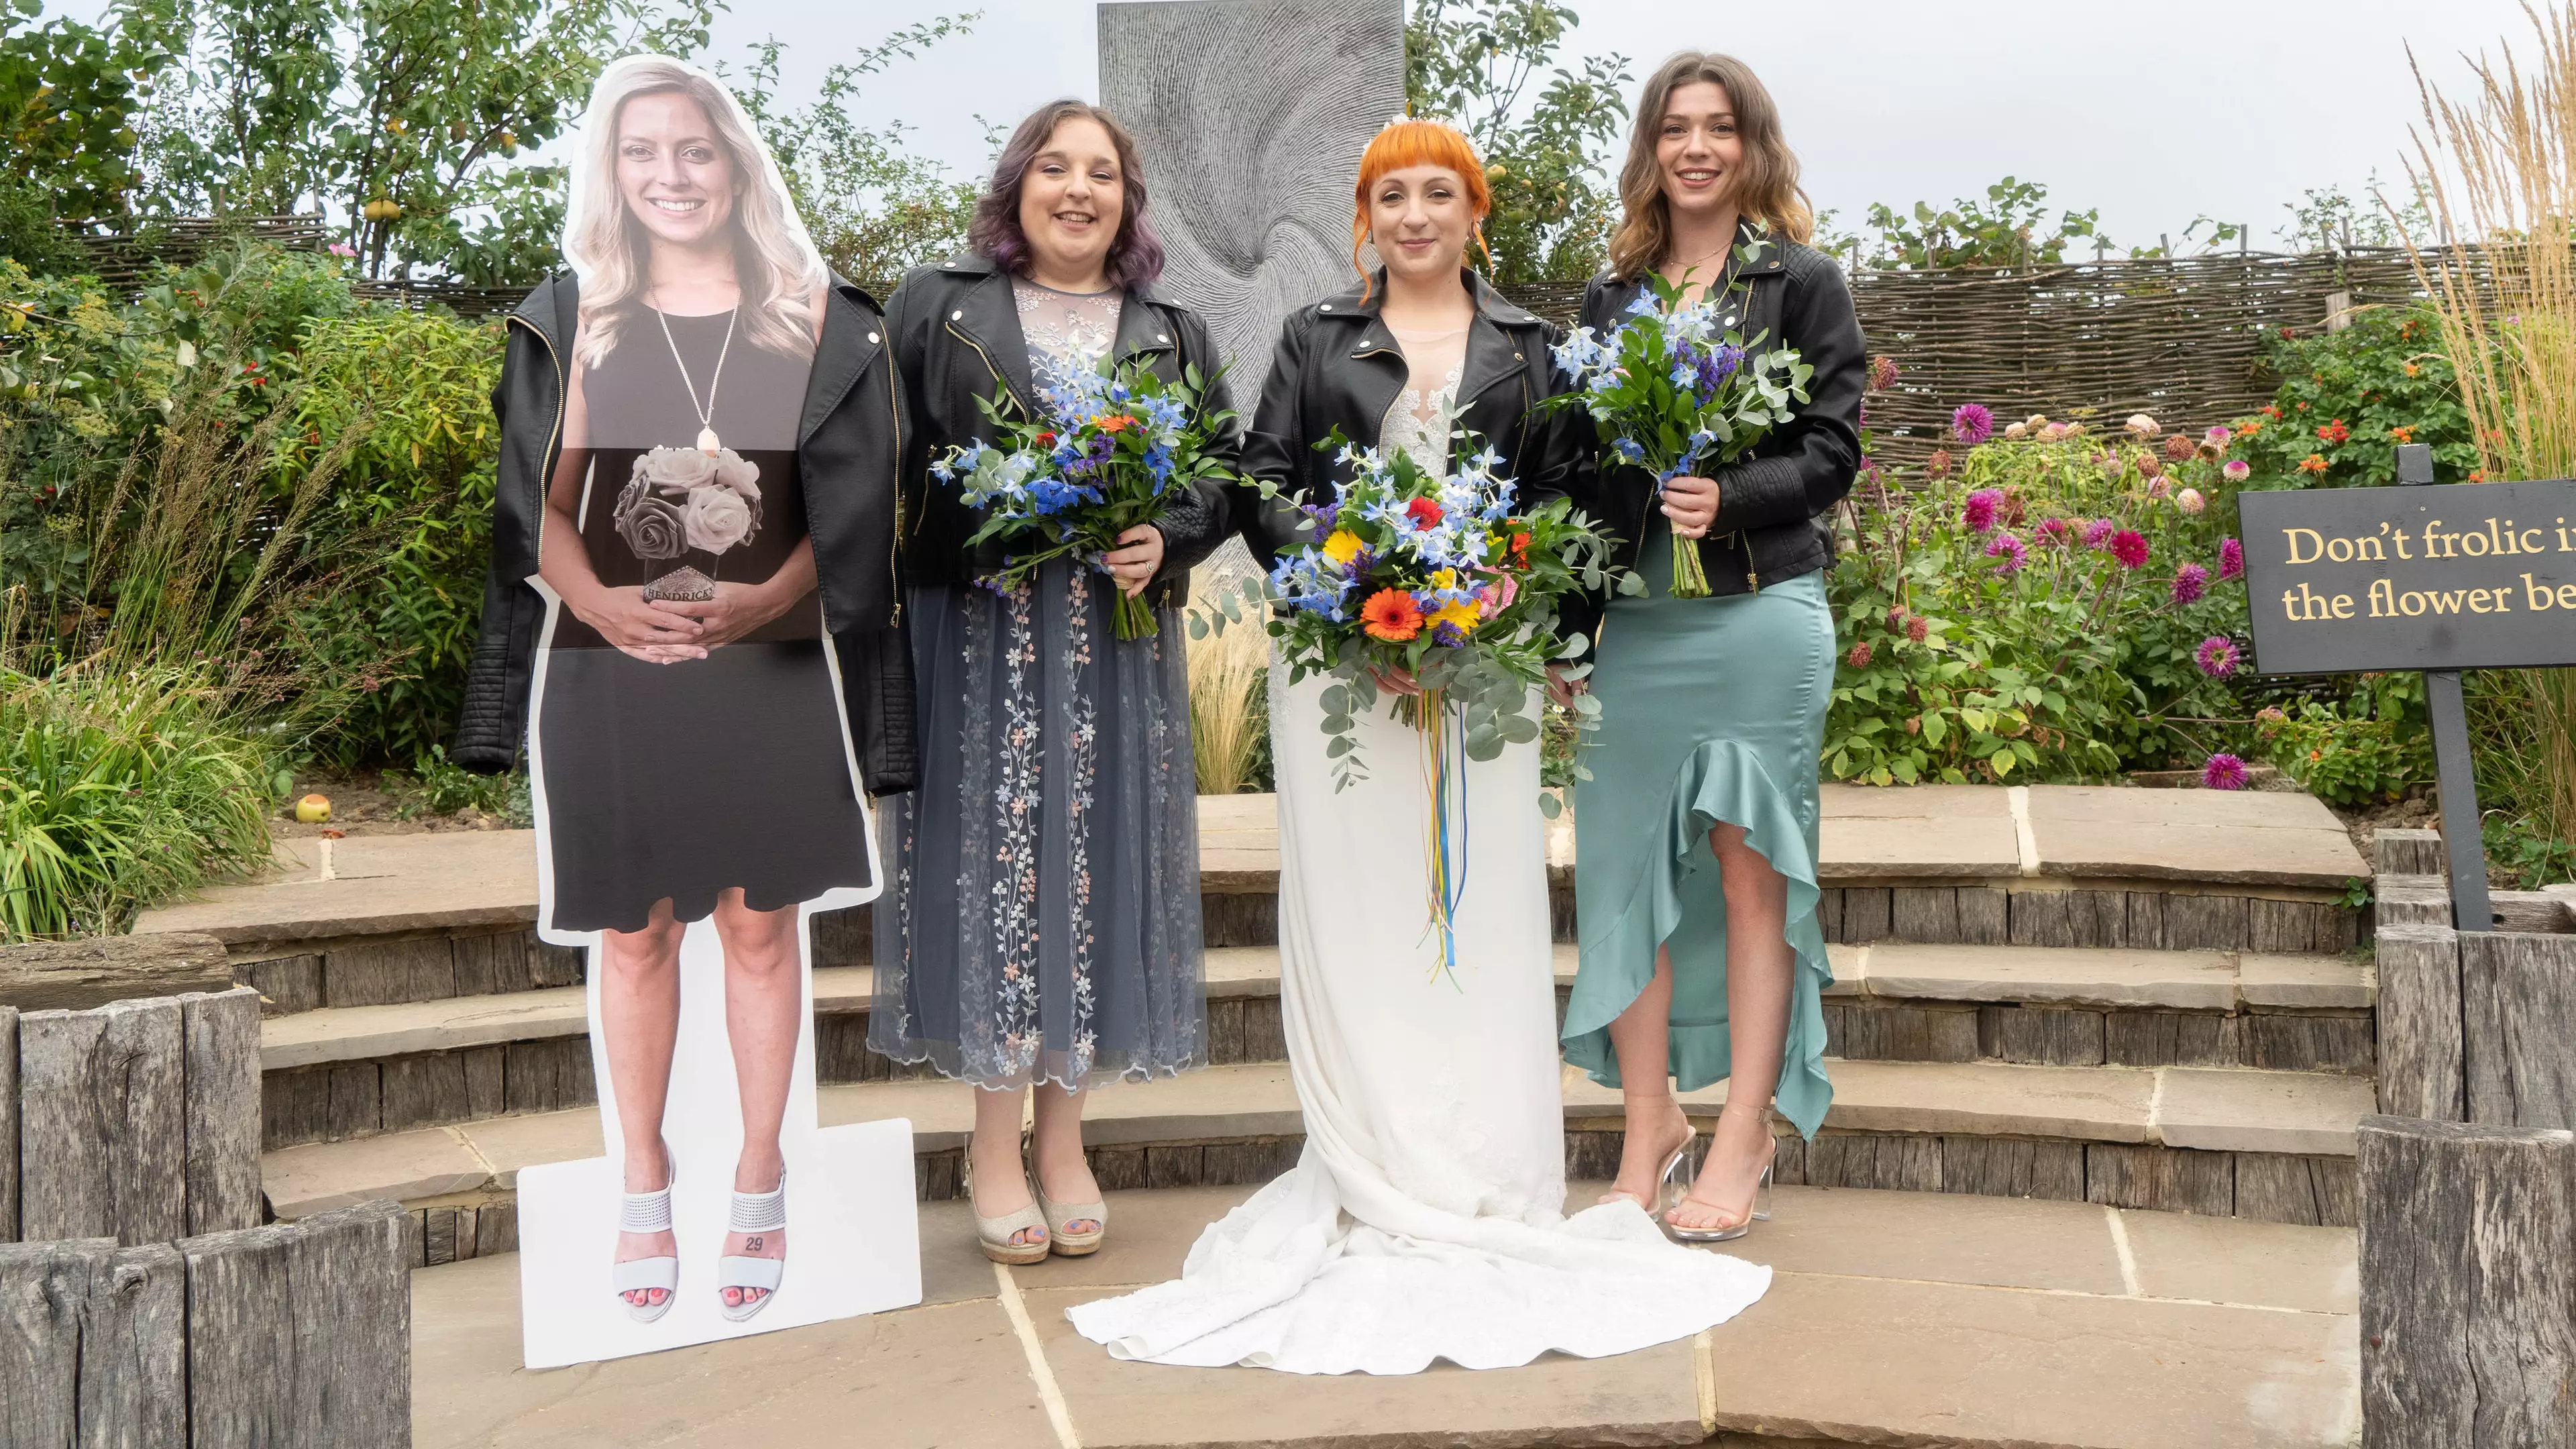 Couple Have Cardboard Cut Outs Of Their Family And Friends For Wedding